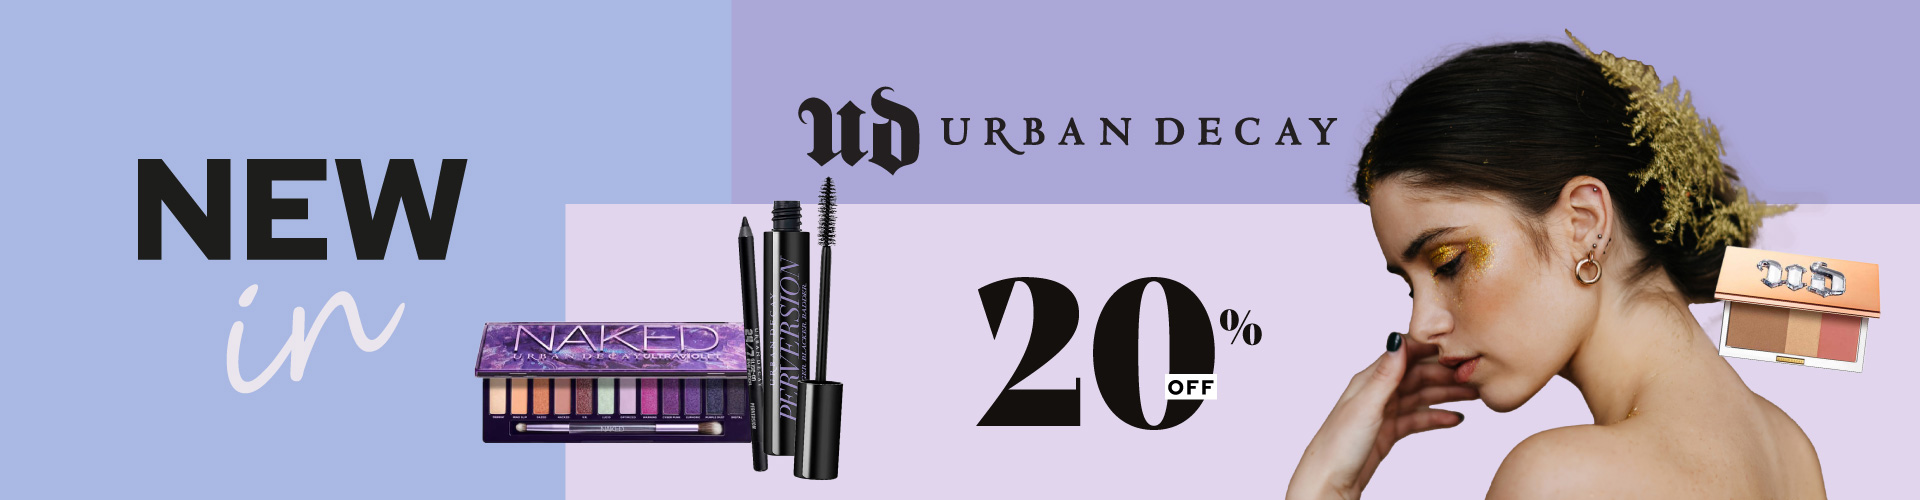 Urban Decay New in